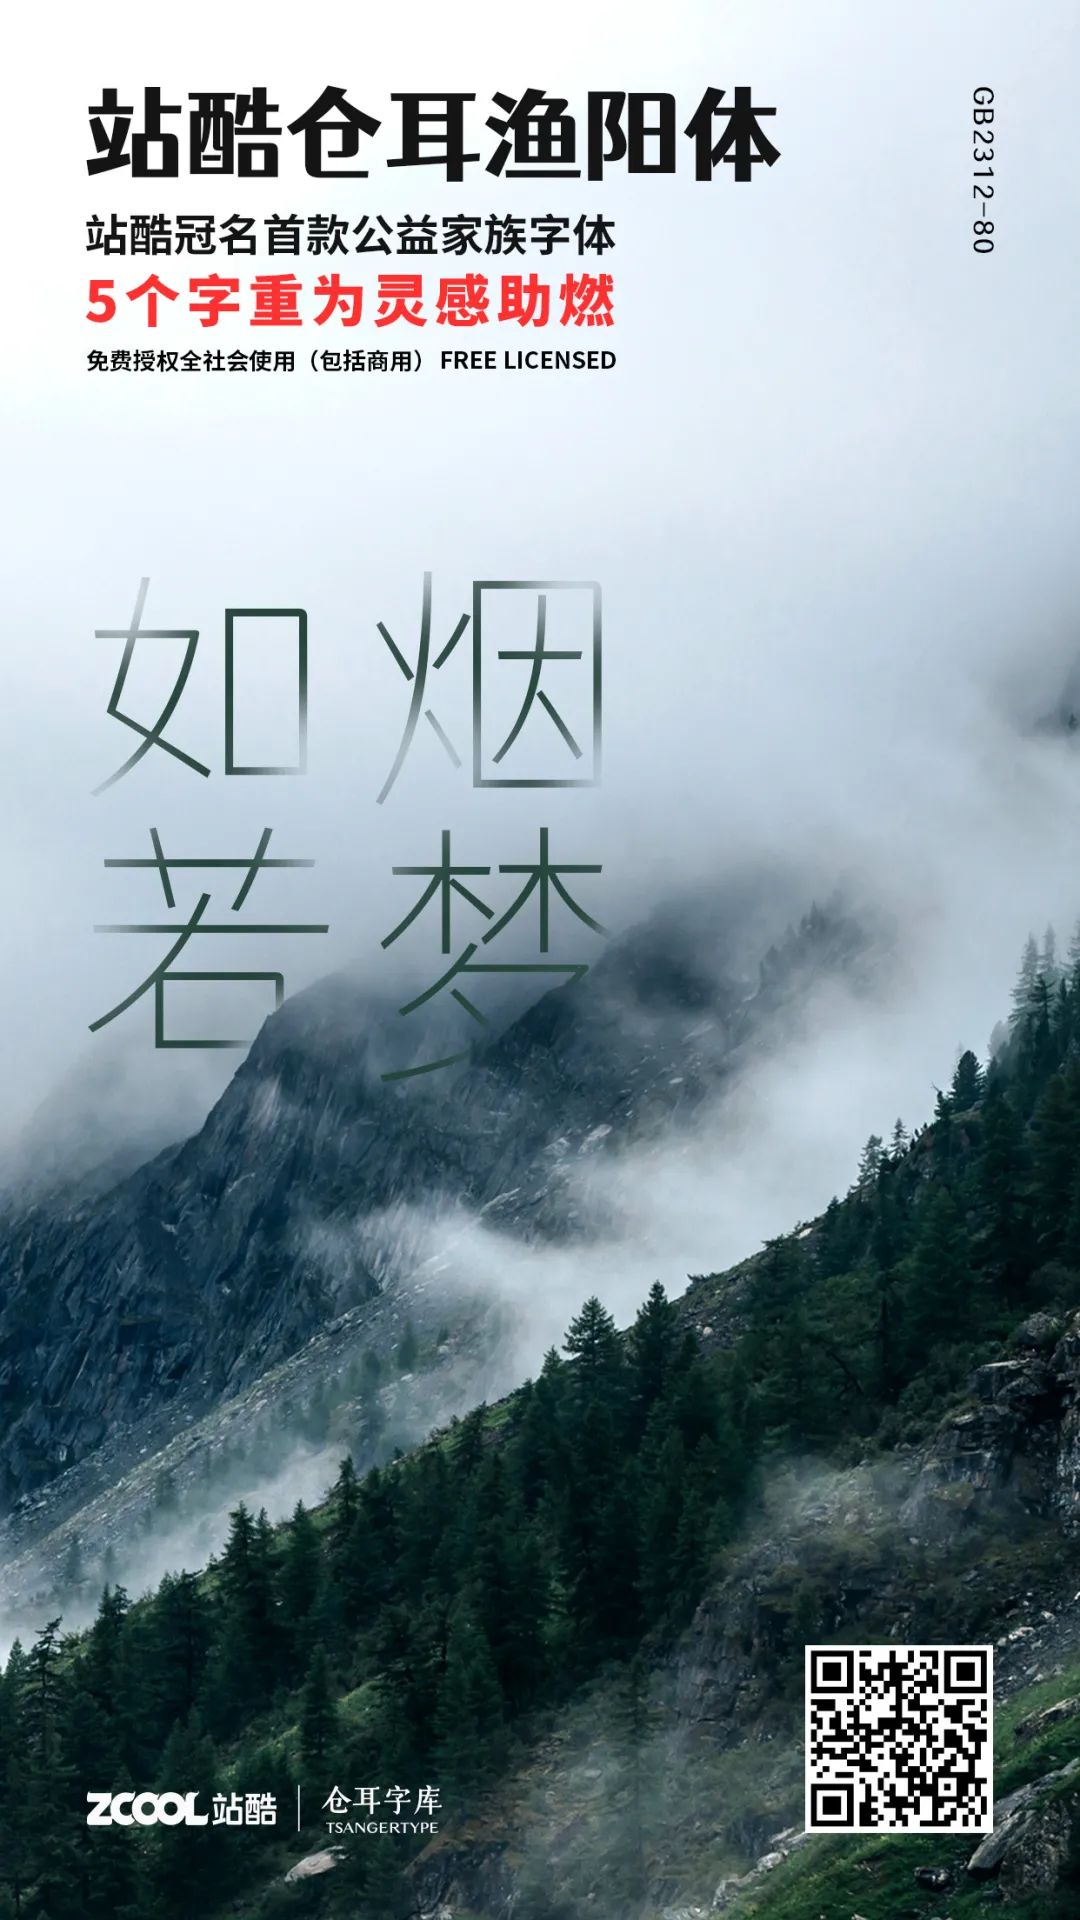 Another free font—Zhanku Canger Yuyang Ti! (download attached)